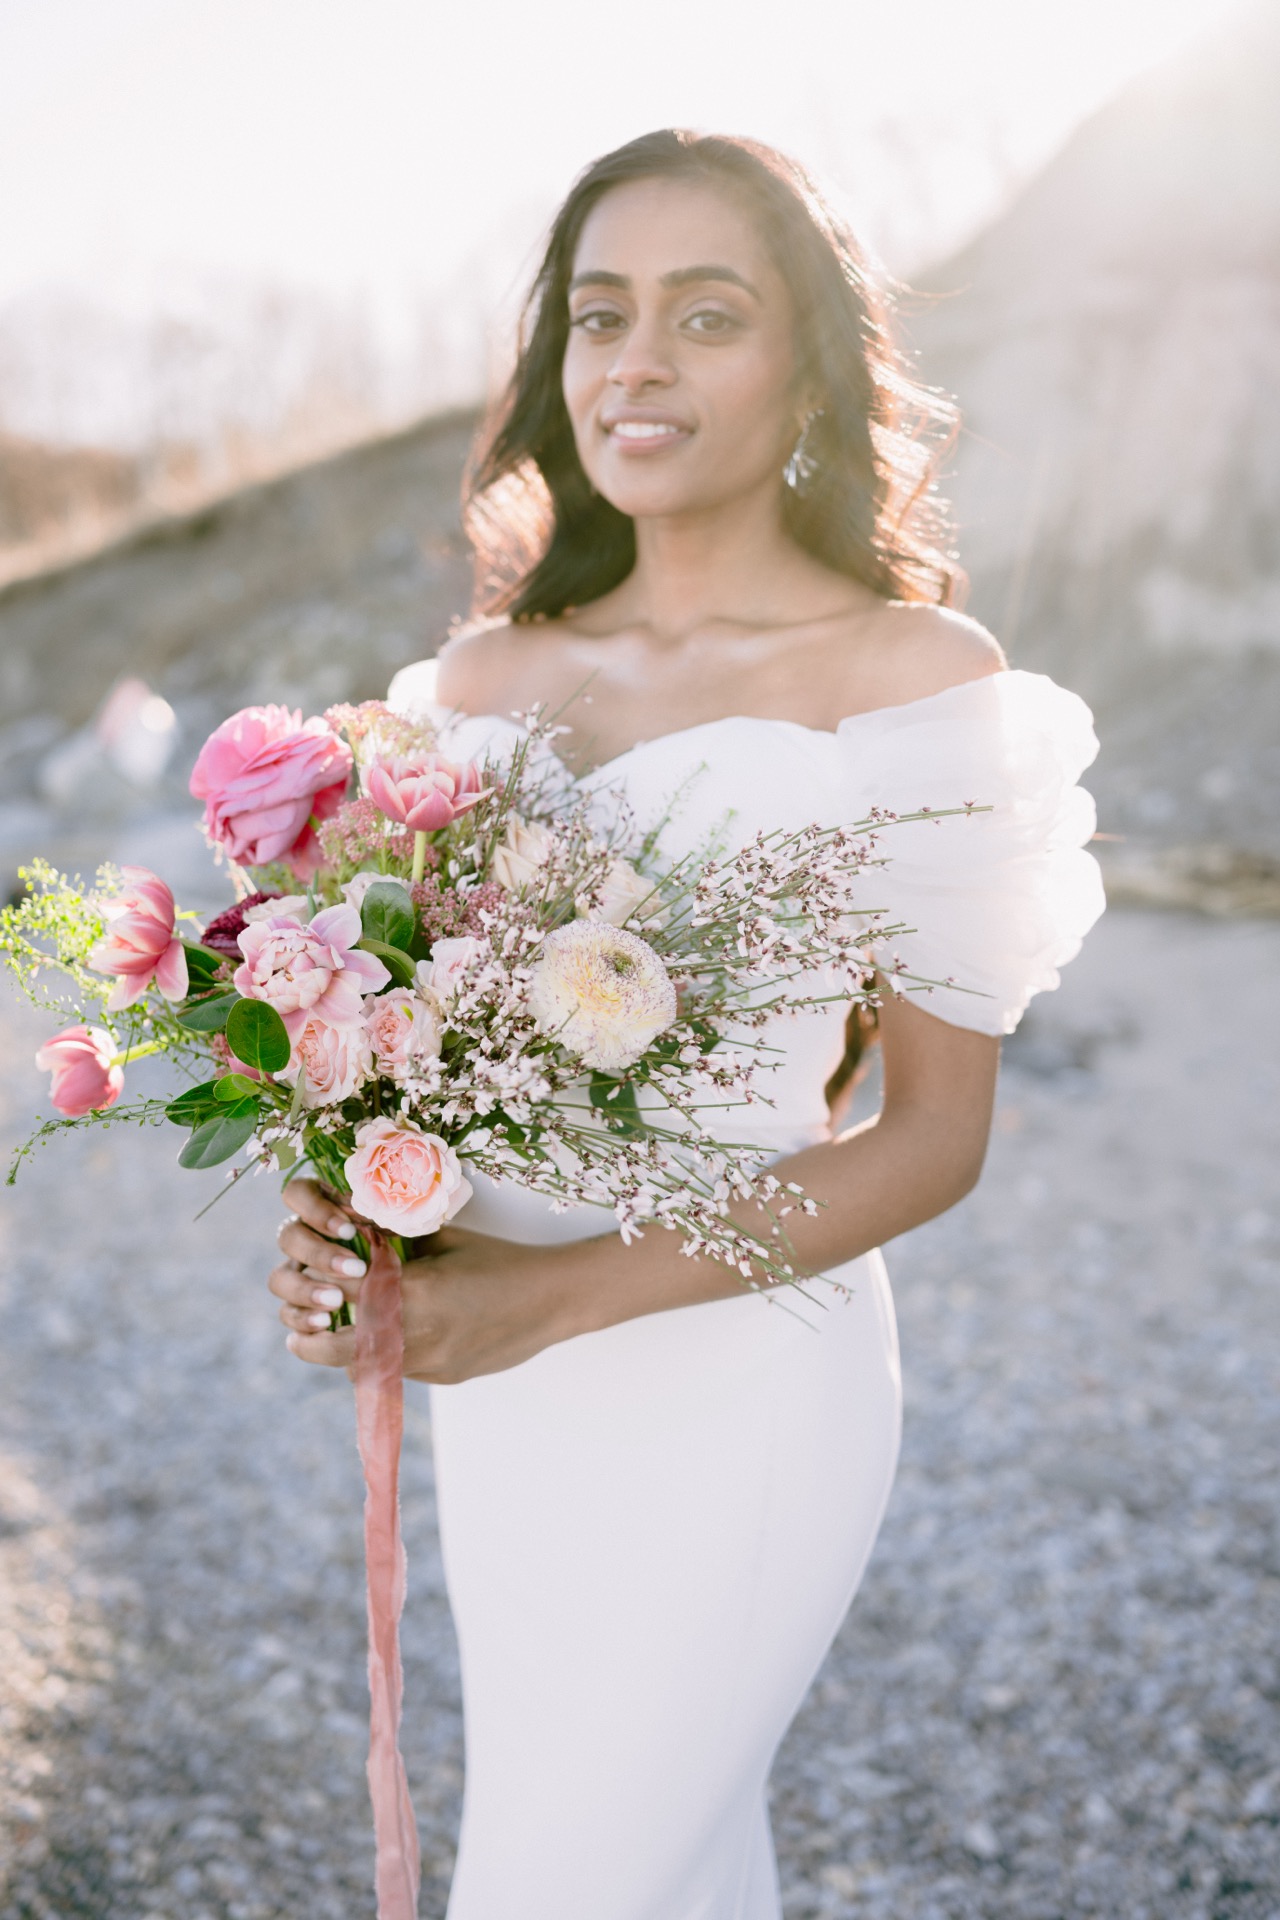 A bride holding a colourful bouquet and pose for her wedding photographer.